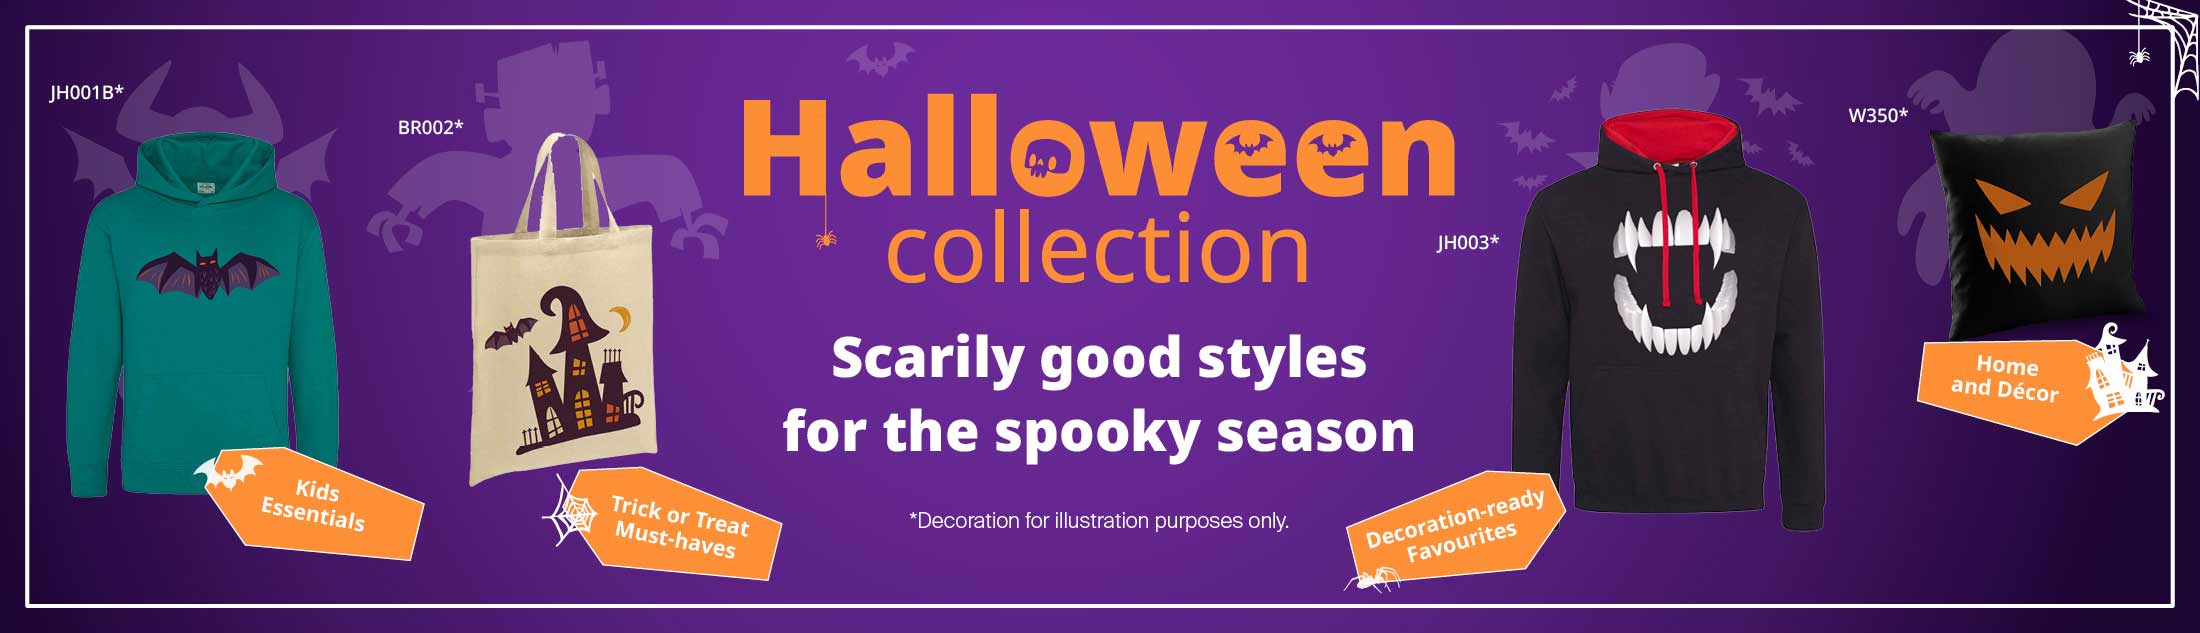 NEW Halloween collection!